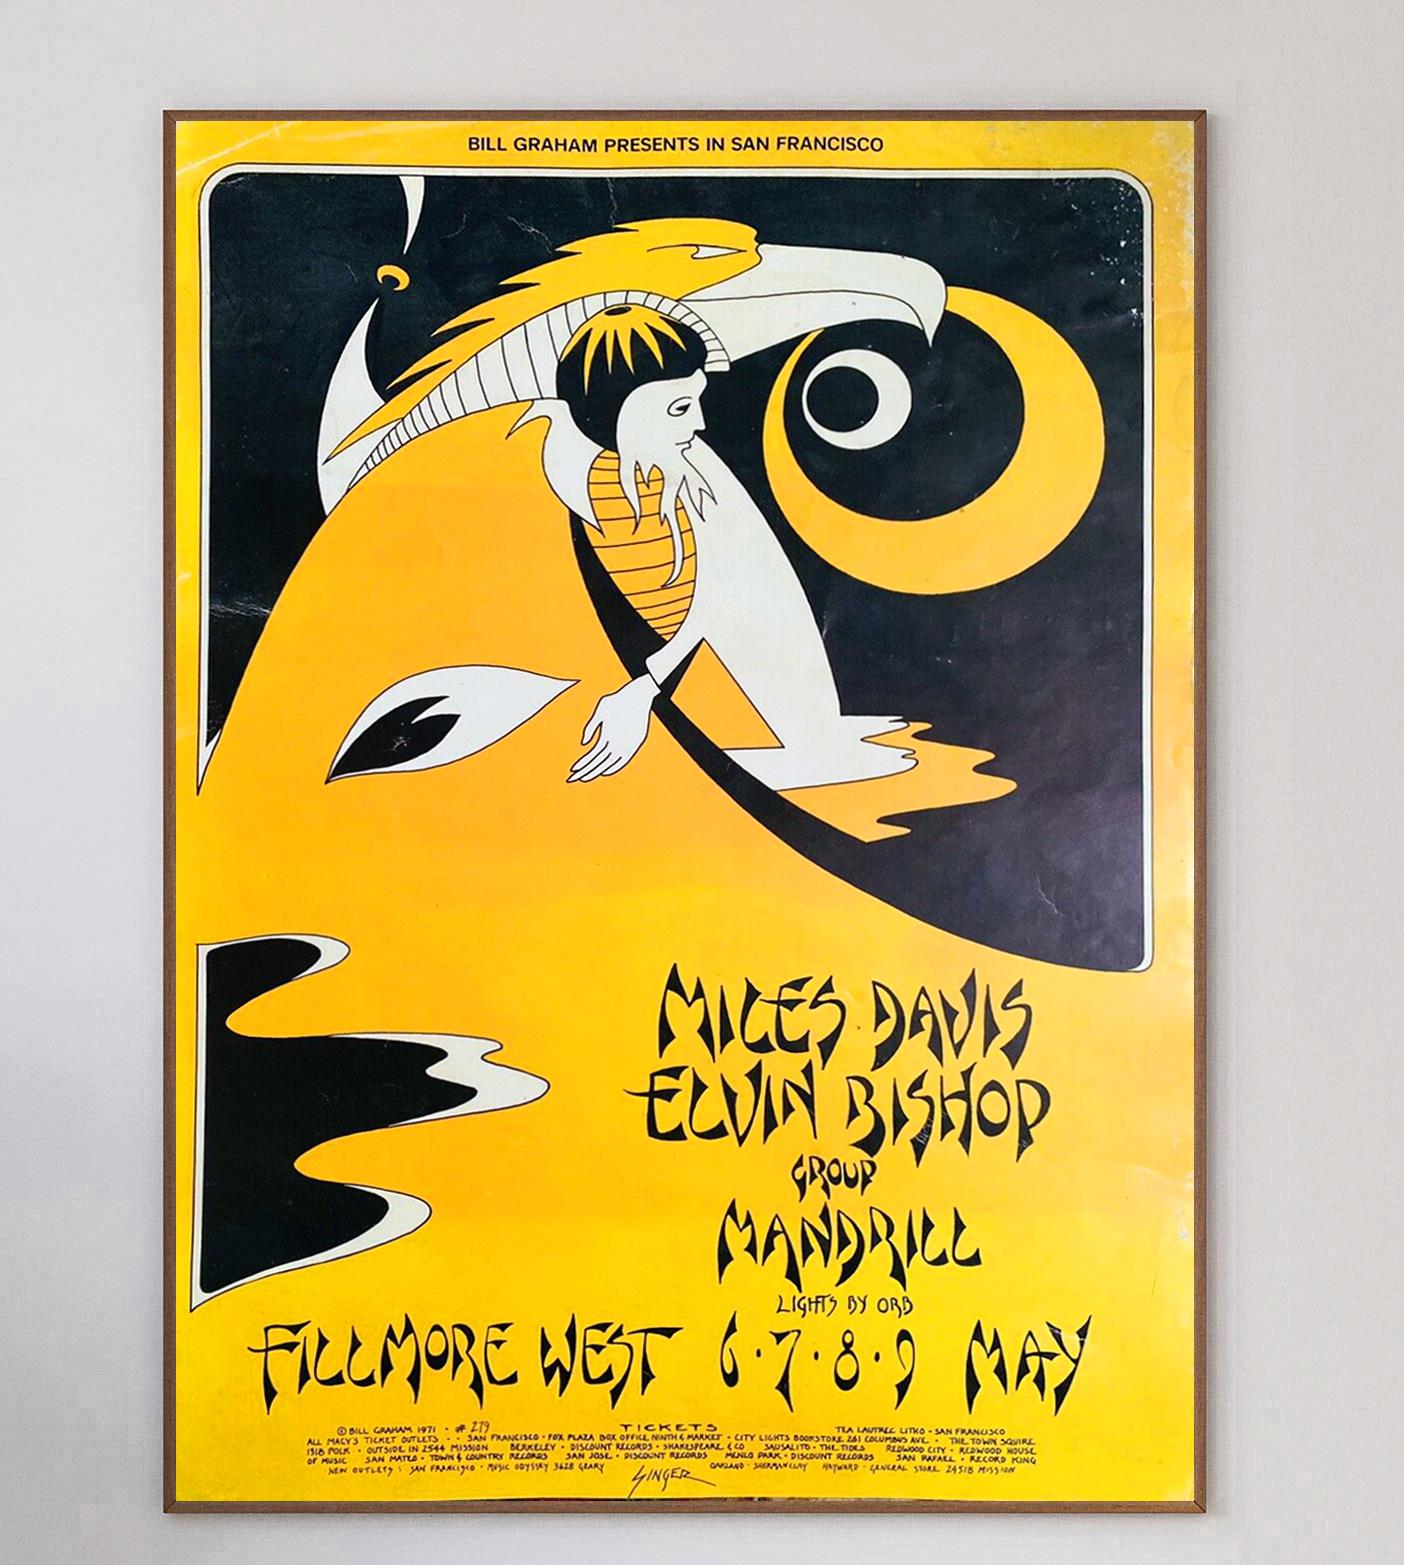 Designed by the iconic concert poster artist David Singer, this beautiful poster was created in 1971 to promote a live concert of Miles Davis, Elvin Bishop & Mandrin at the world famous Fillmore West in San Francisco. Singer is best known for his